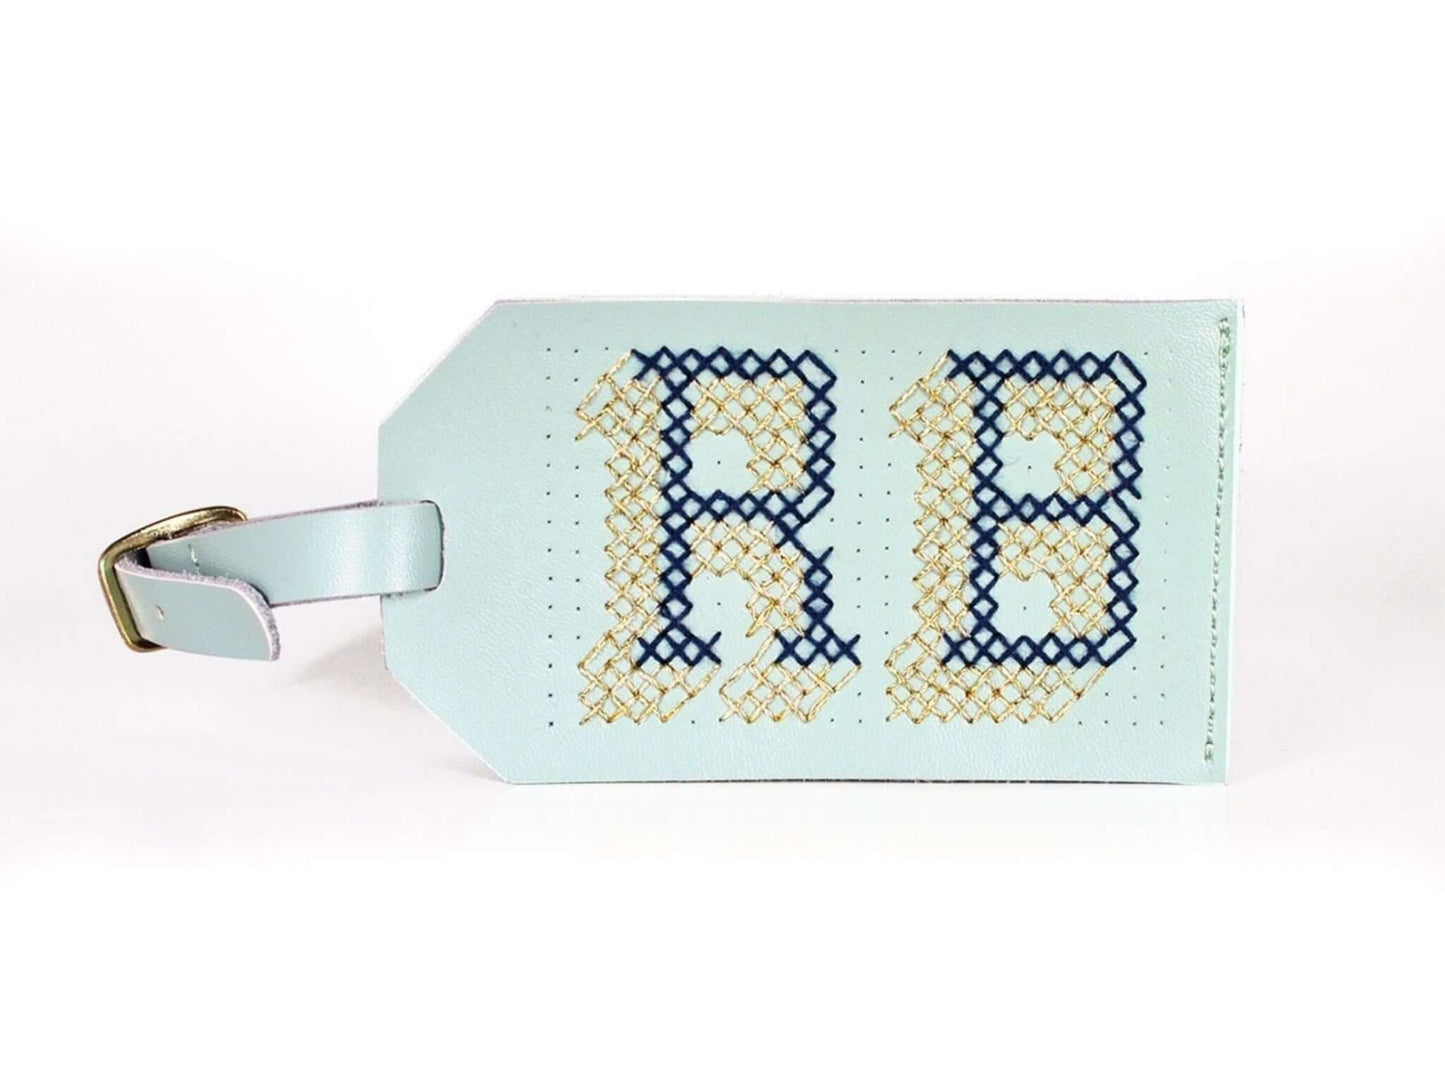 DIY Cross Stitch Luggage Tag Kit (Mint) from Chasing Threads